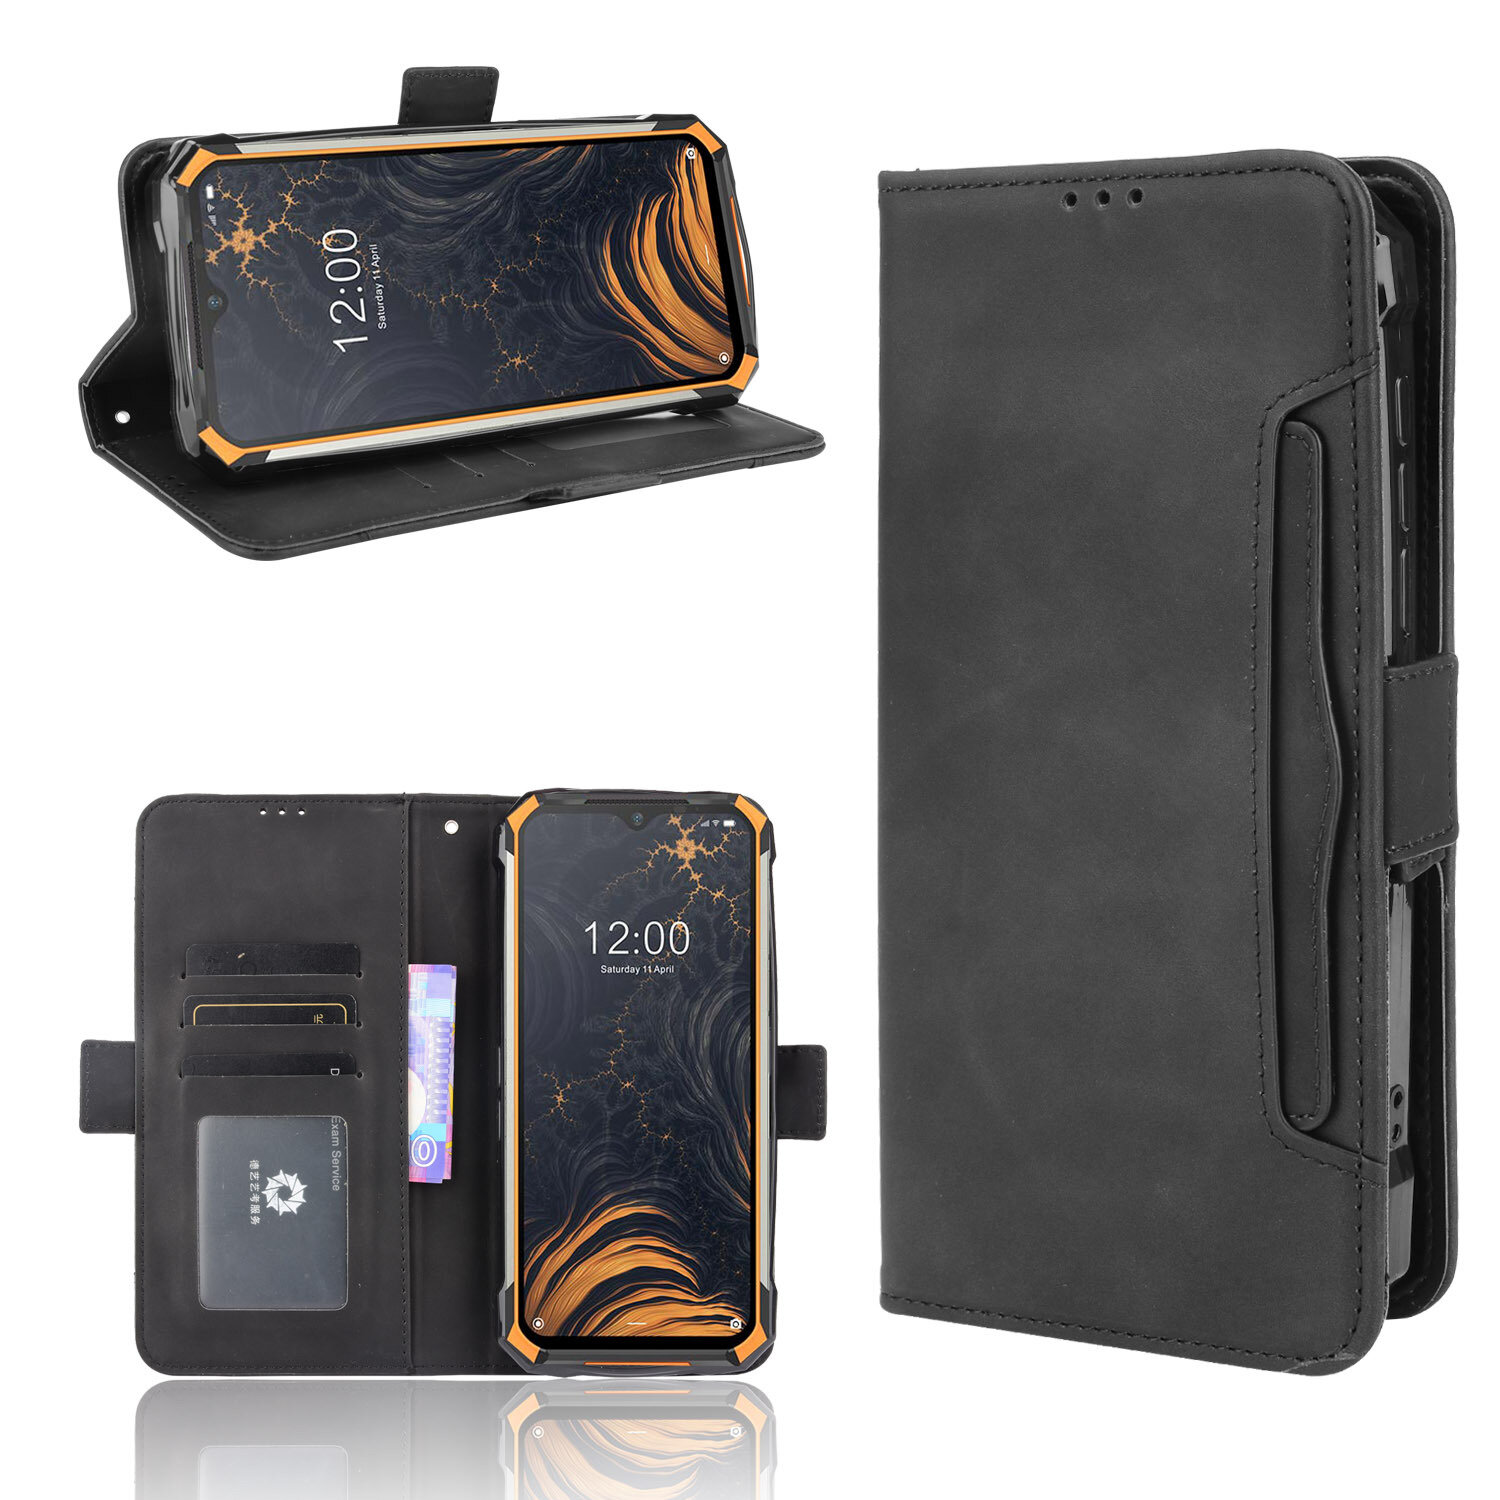 

Bakeey for Doogee S88 Pro/ Doogee S88 Plus Case Magnetic Flip with Multiple Card Slot Wallet Folding Stand PU Leather Sh